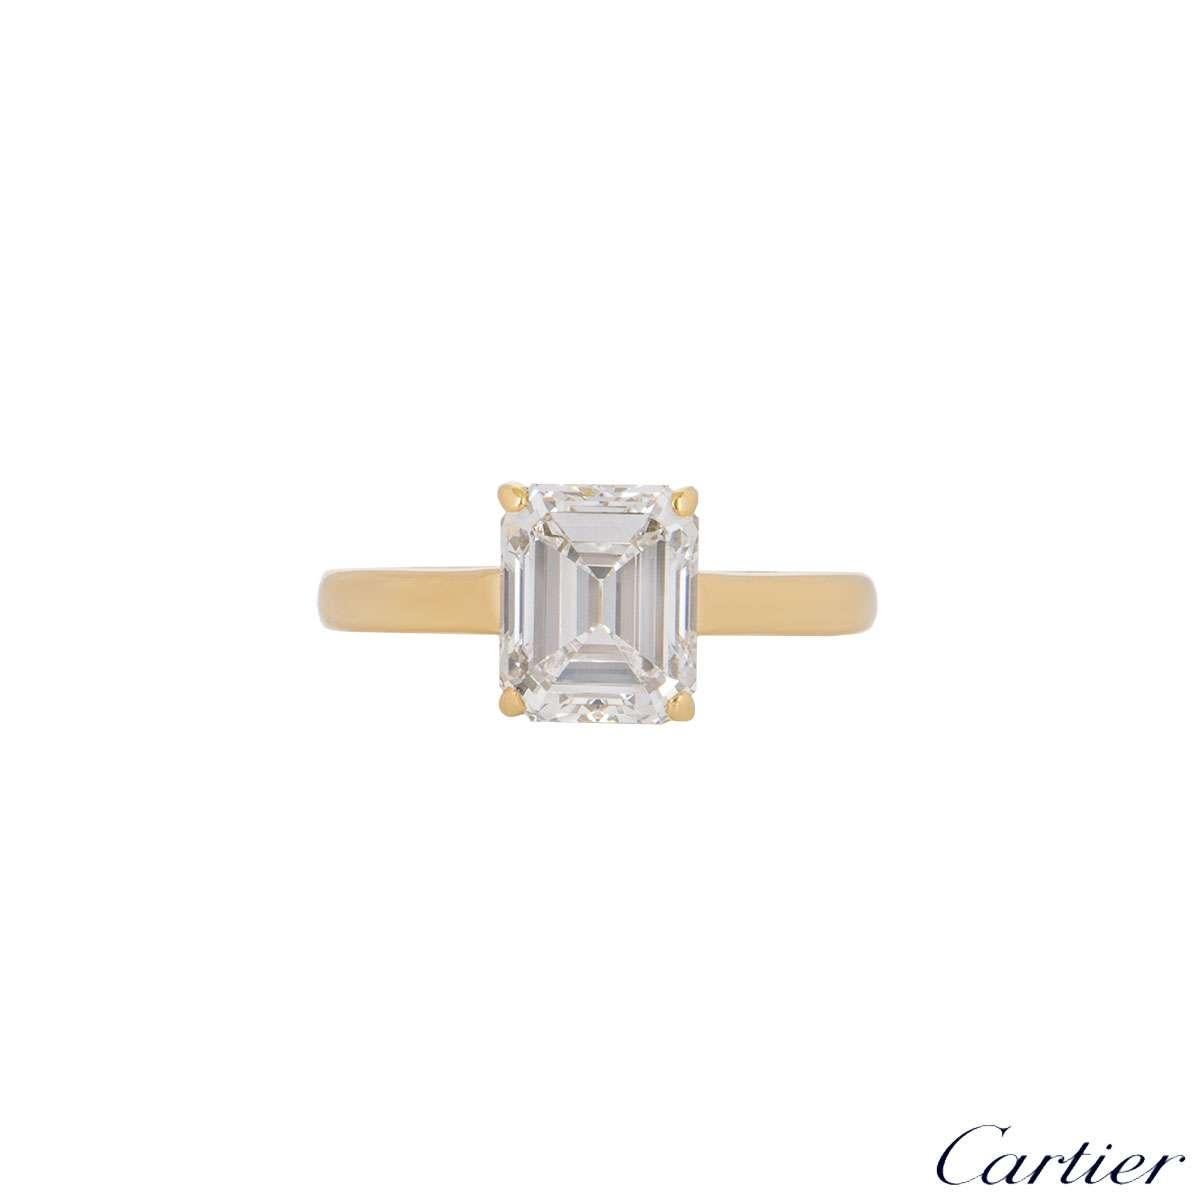 cartier engagement ring 1895